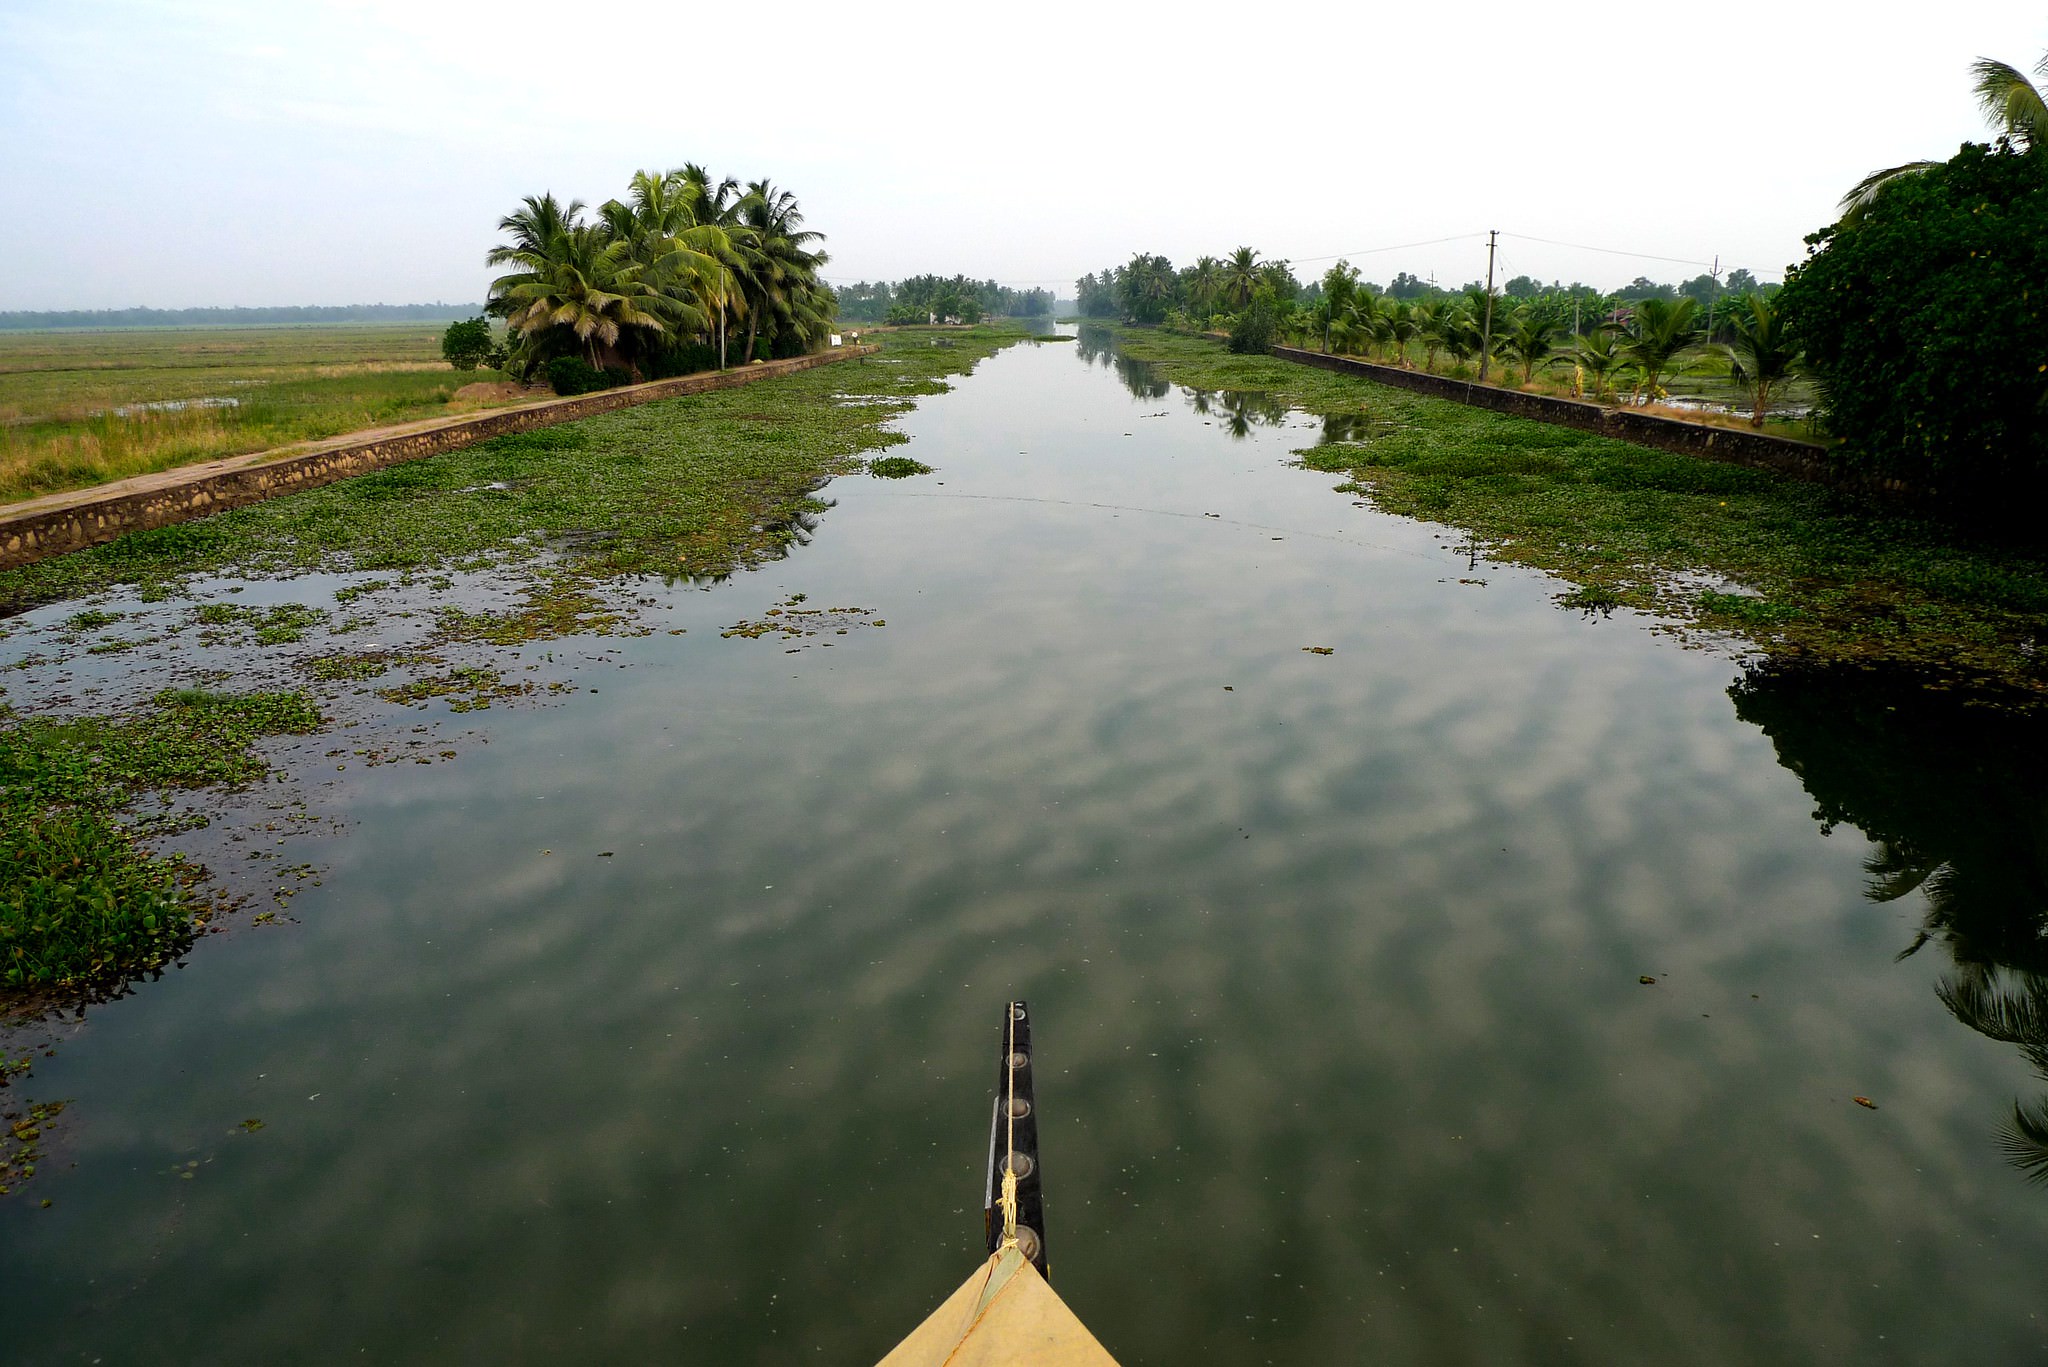 View of the Kerala backwaters